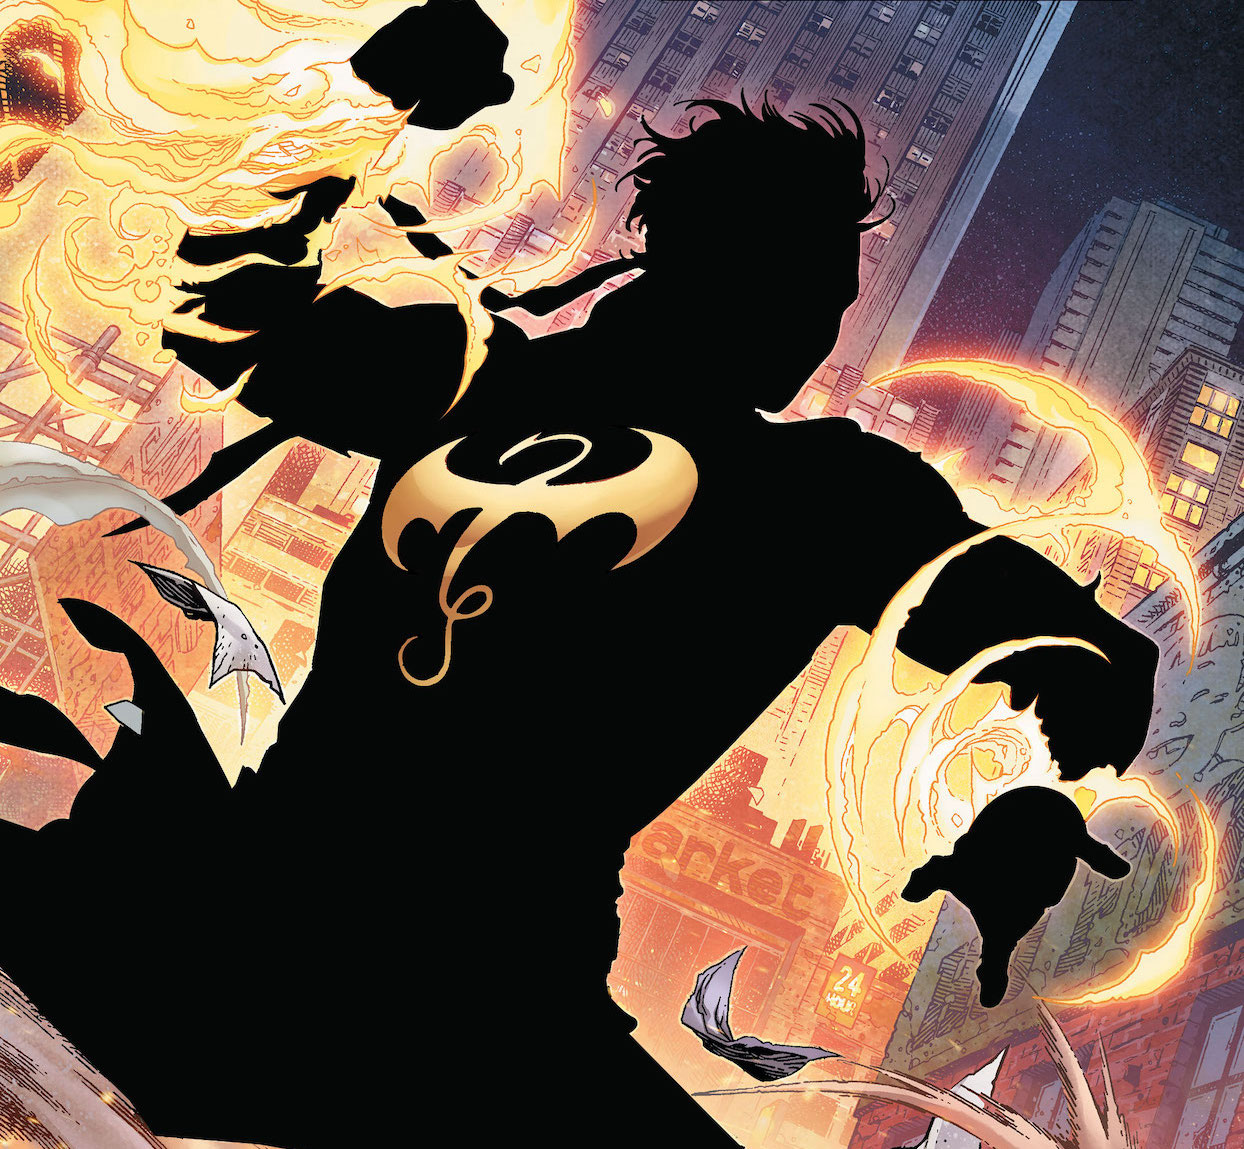 Marvel asks, 'Who is the new Iron Fist' in new promo